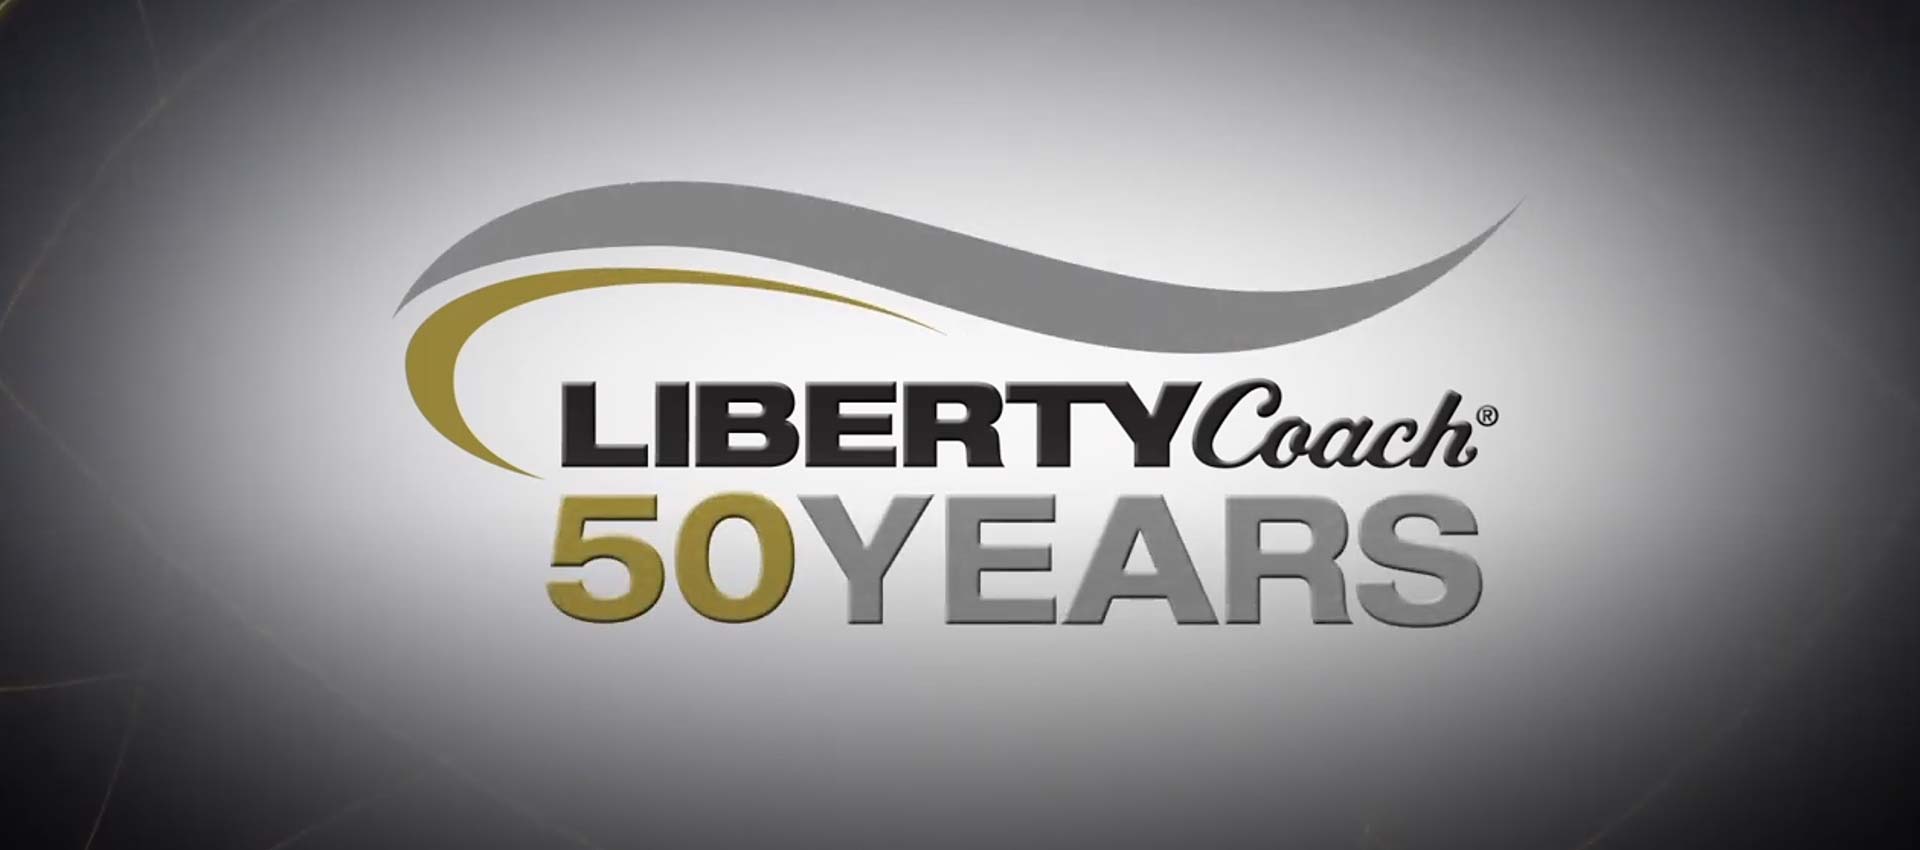 Thumbnail for Liberty Coach 50 Years video